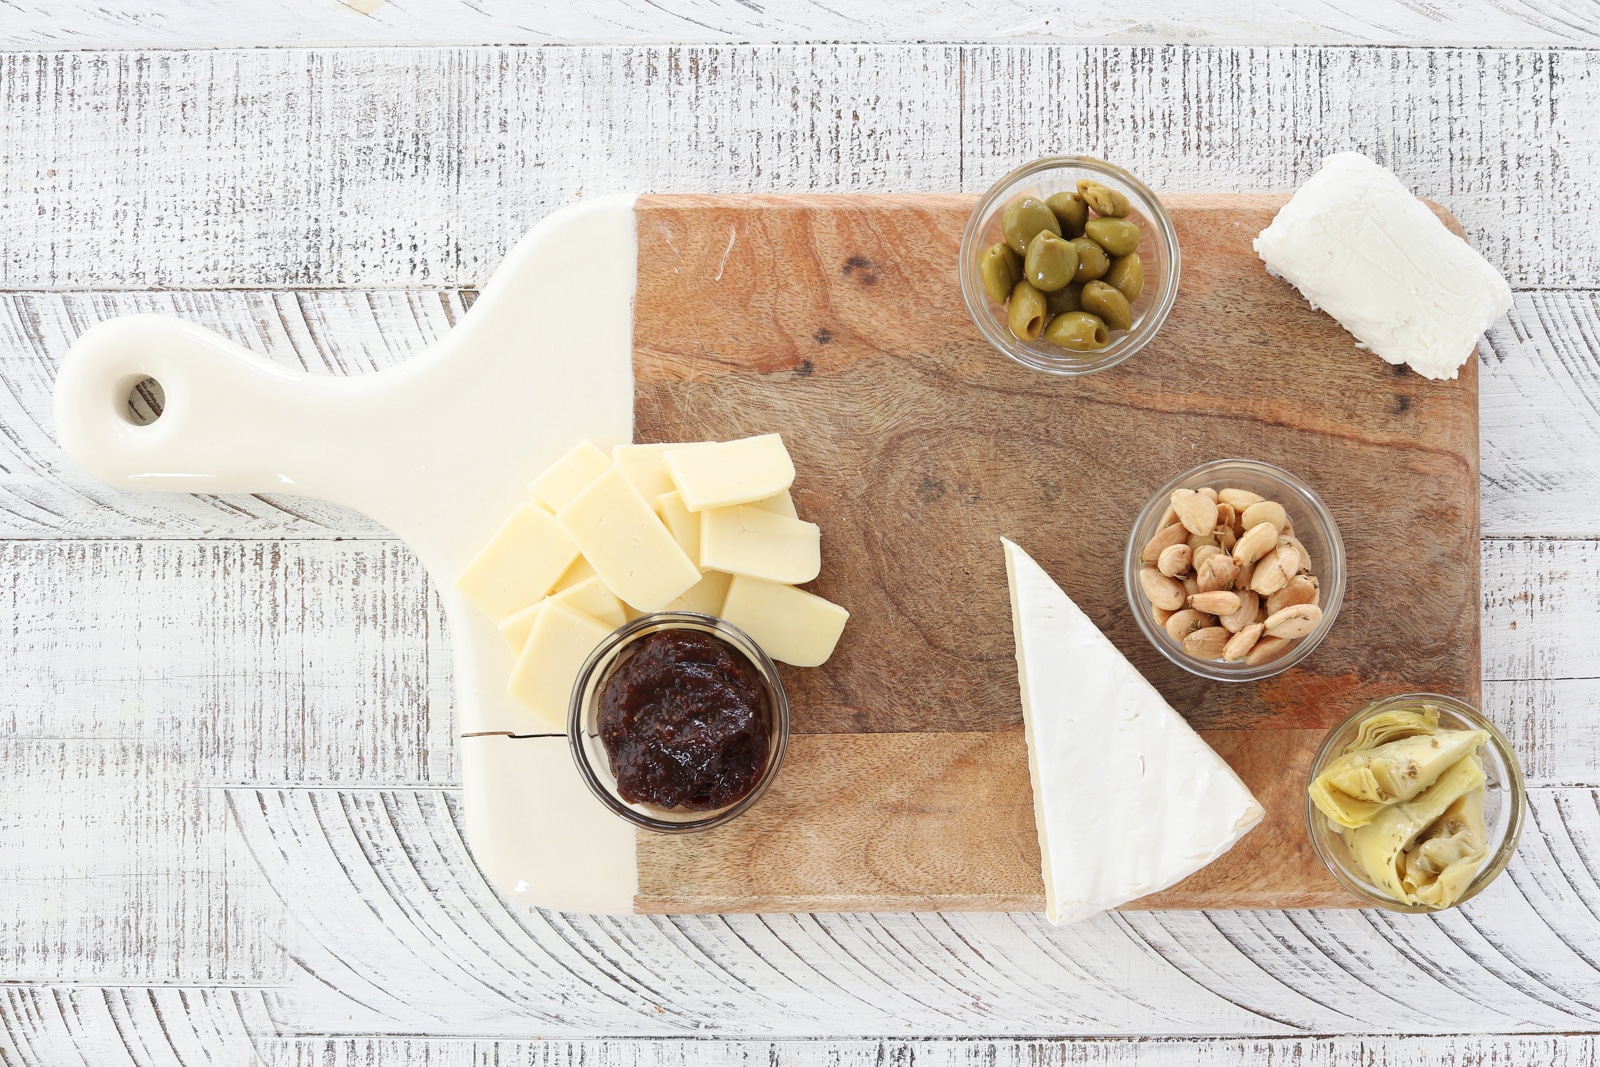 Cutting board with almonds, olives, artichokes, fig butter, brie, goat cheese and cheddar cheese.